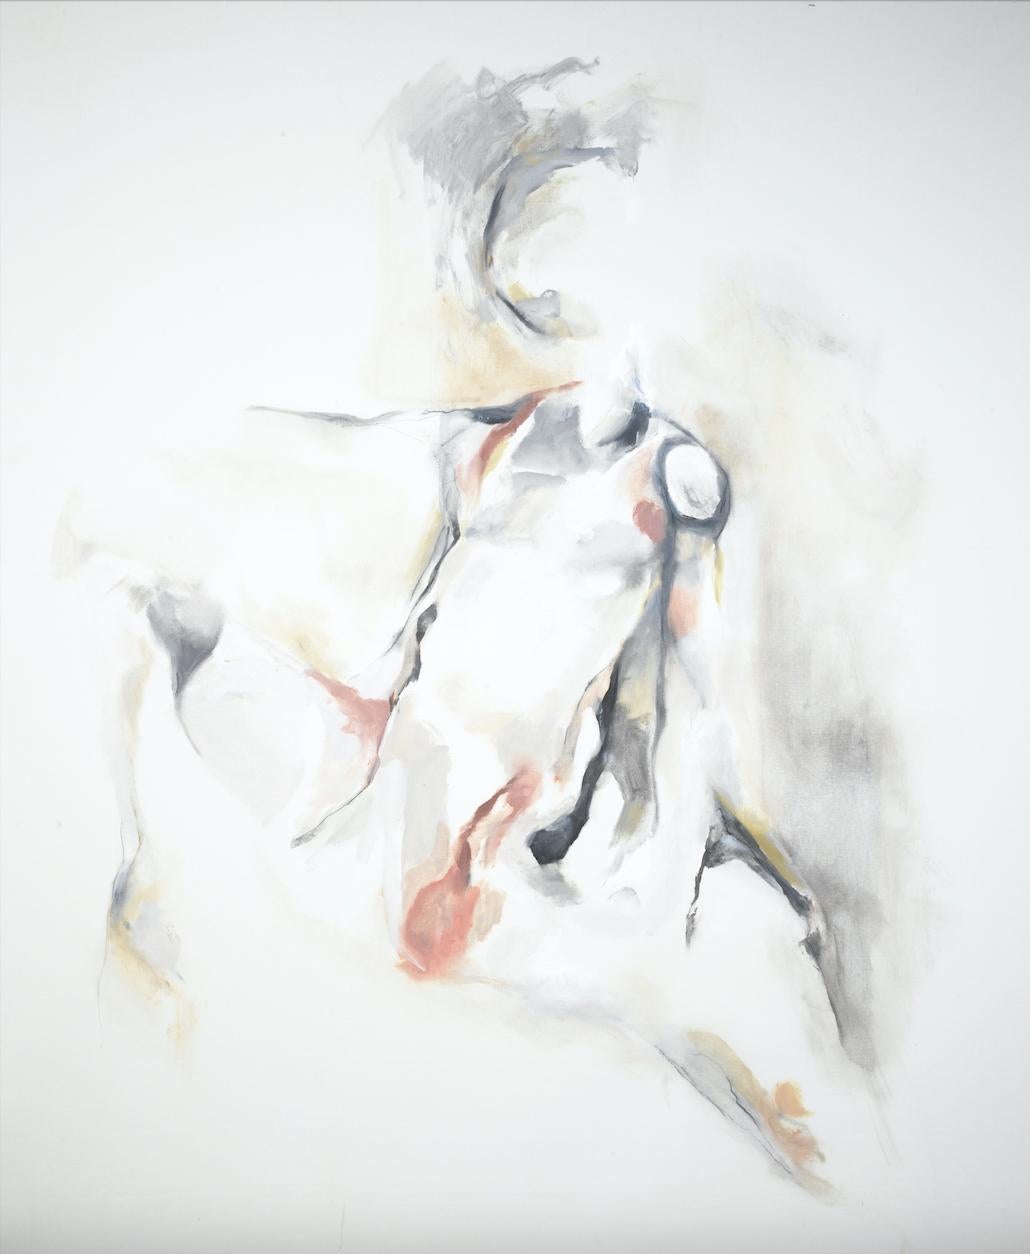 SURMOUNT: A large sensual figurative abstract painting on canvas